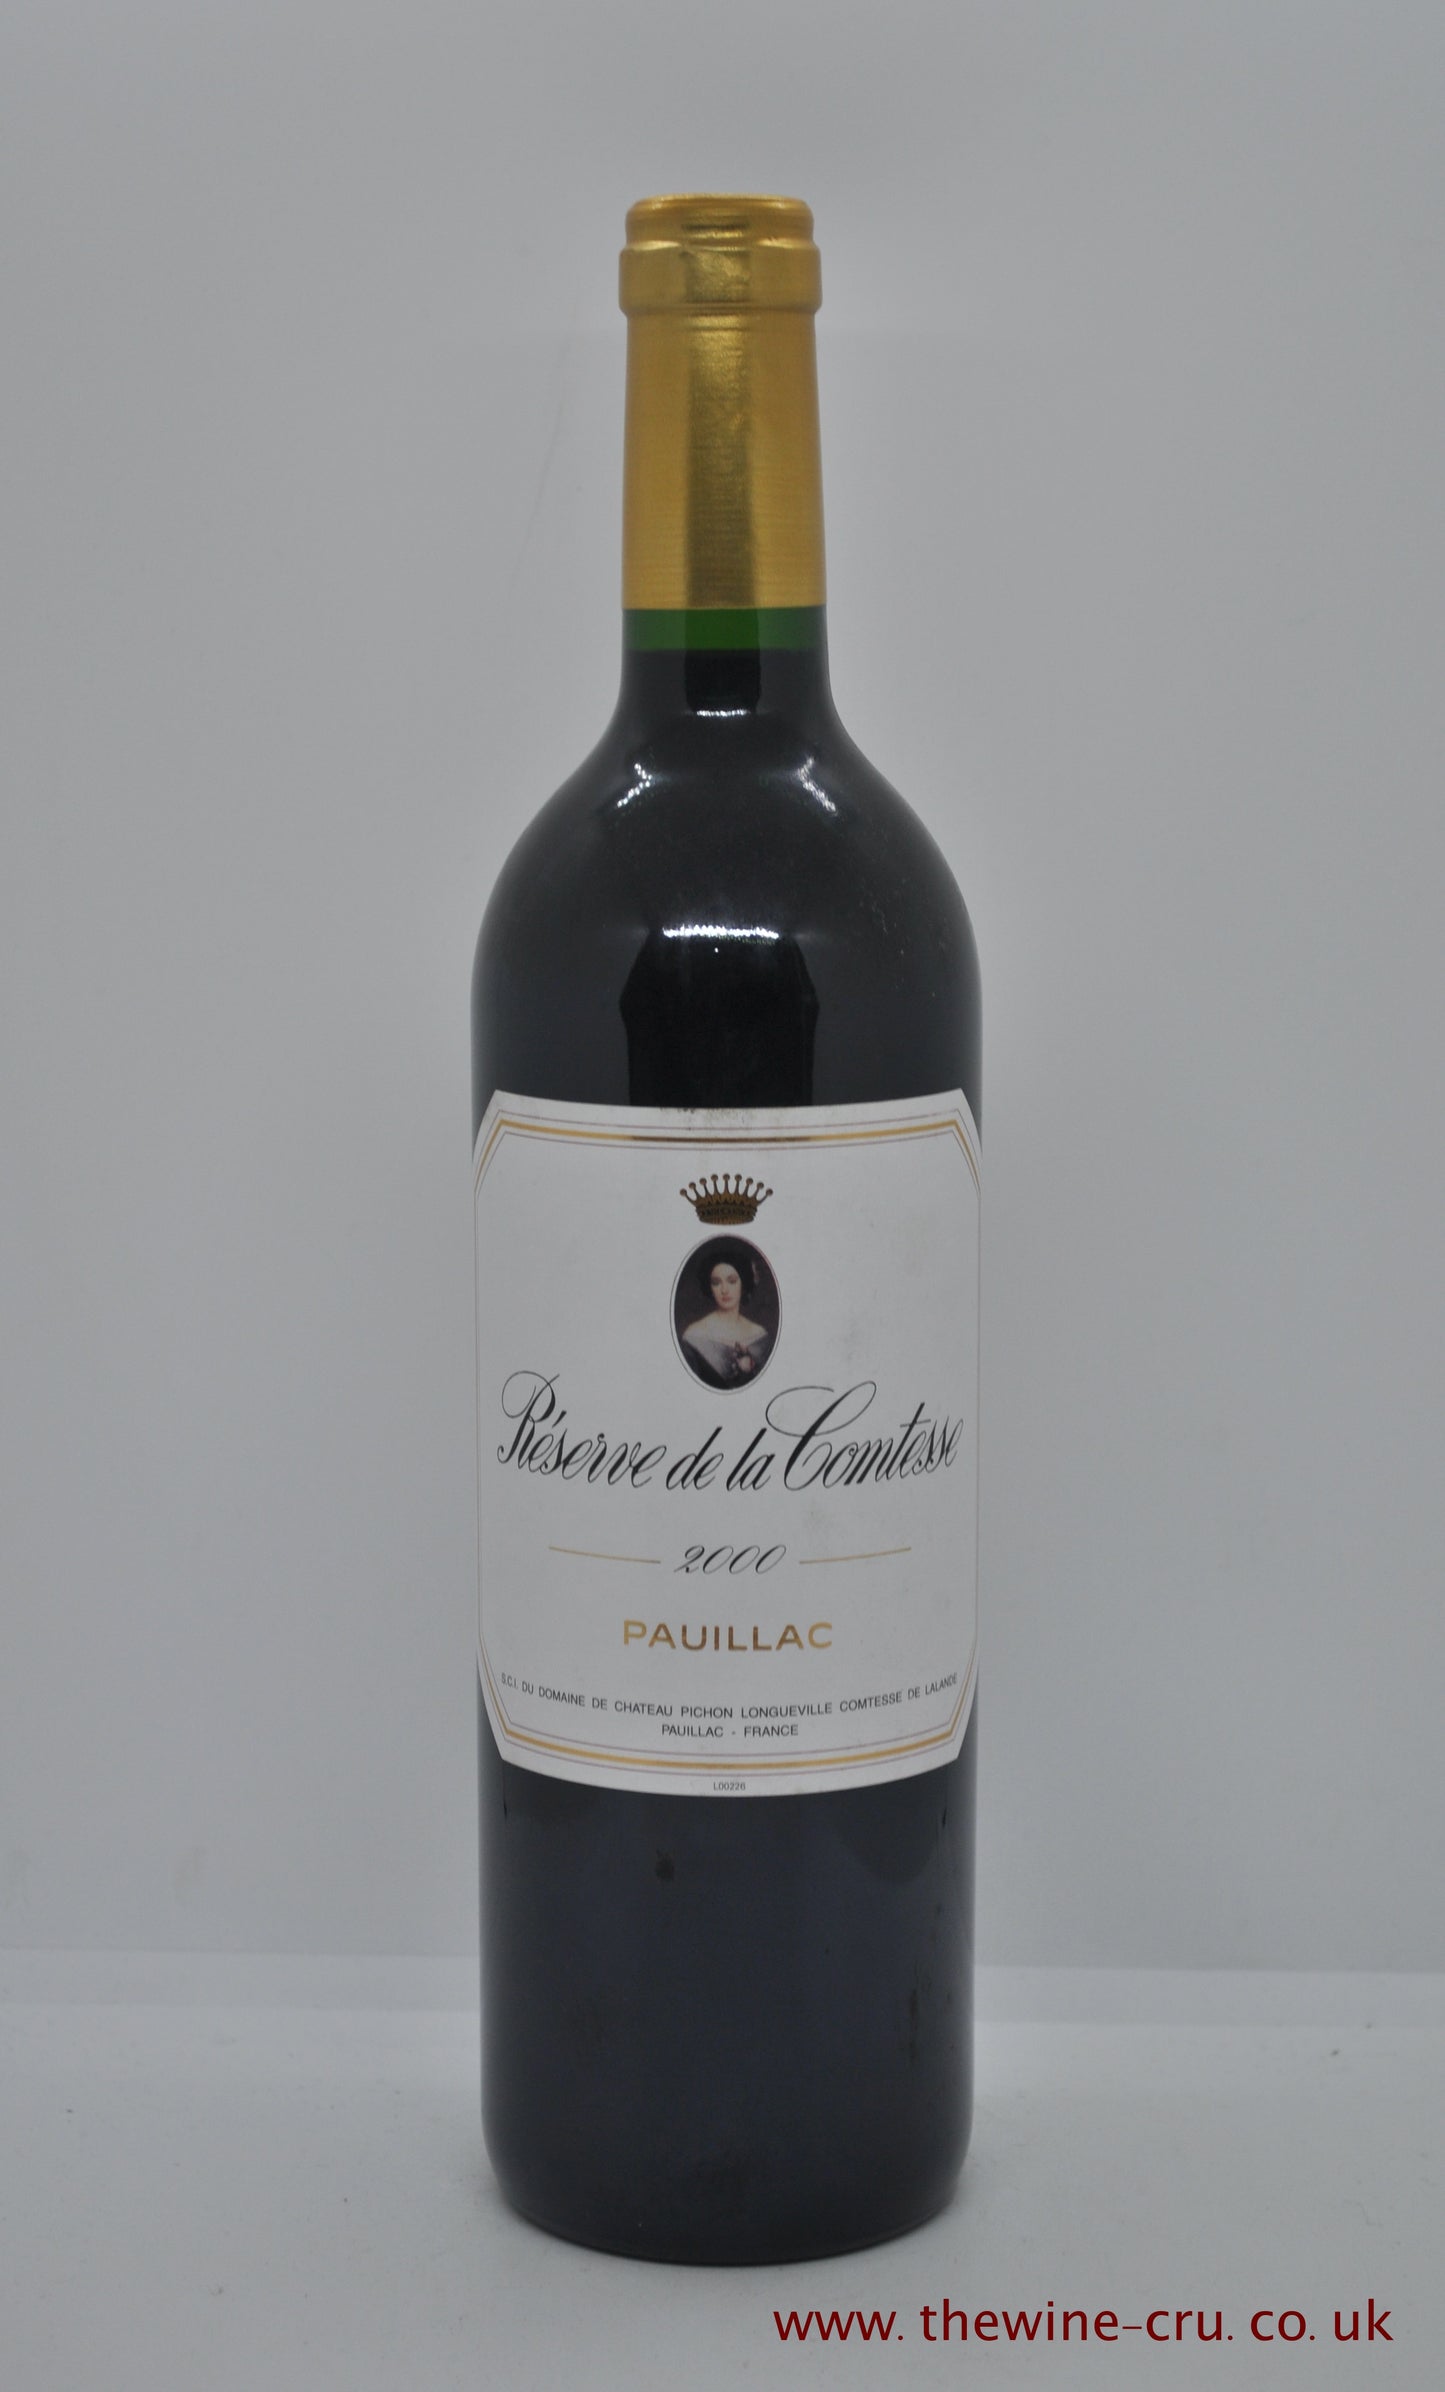 2000 vintage red wine. Reserve de la Comtesse 2000. Immediate delivery UK. Free local delivery.